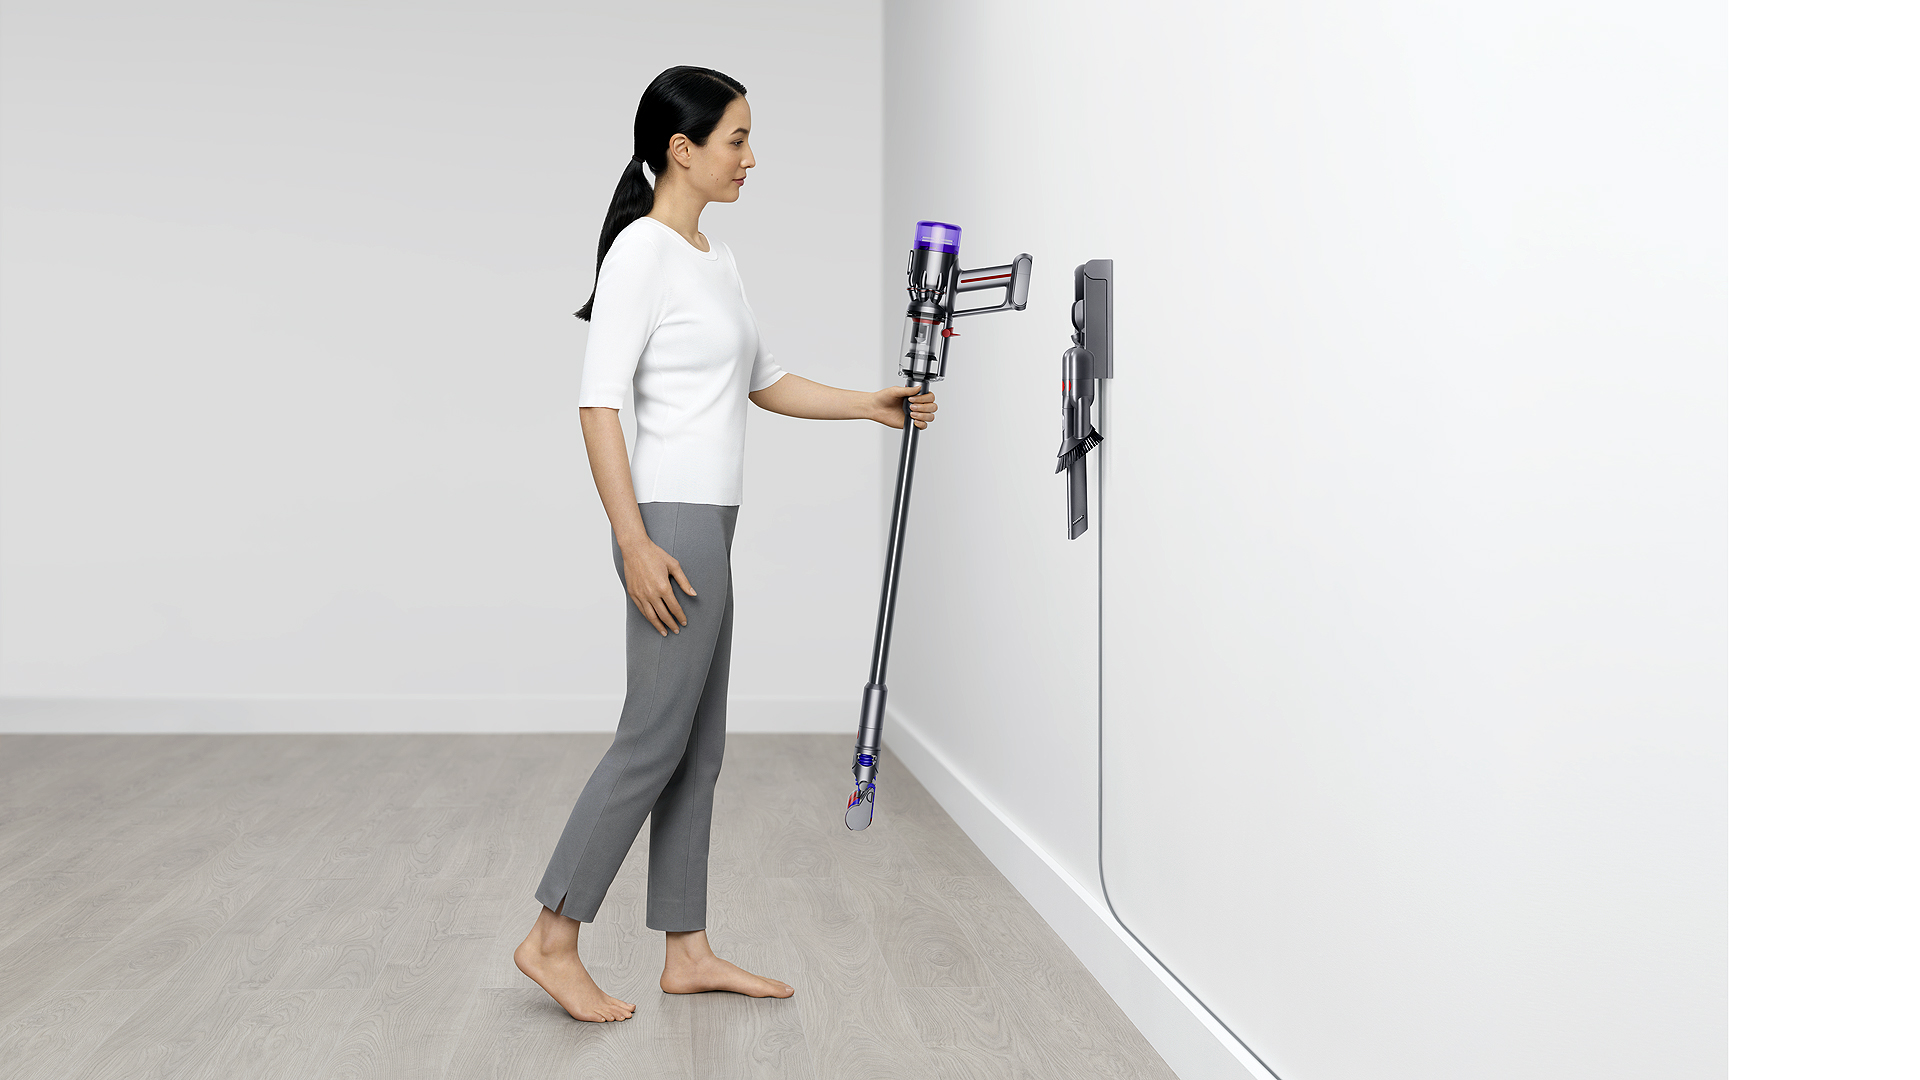 Dyson Micro review: the smallest Dyson is a solid back-up handheld